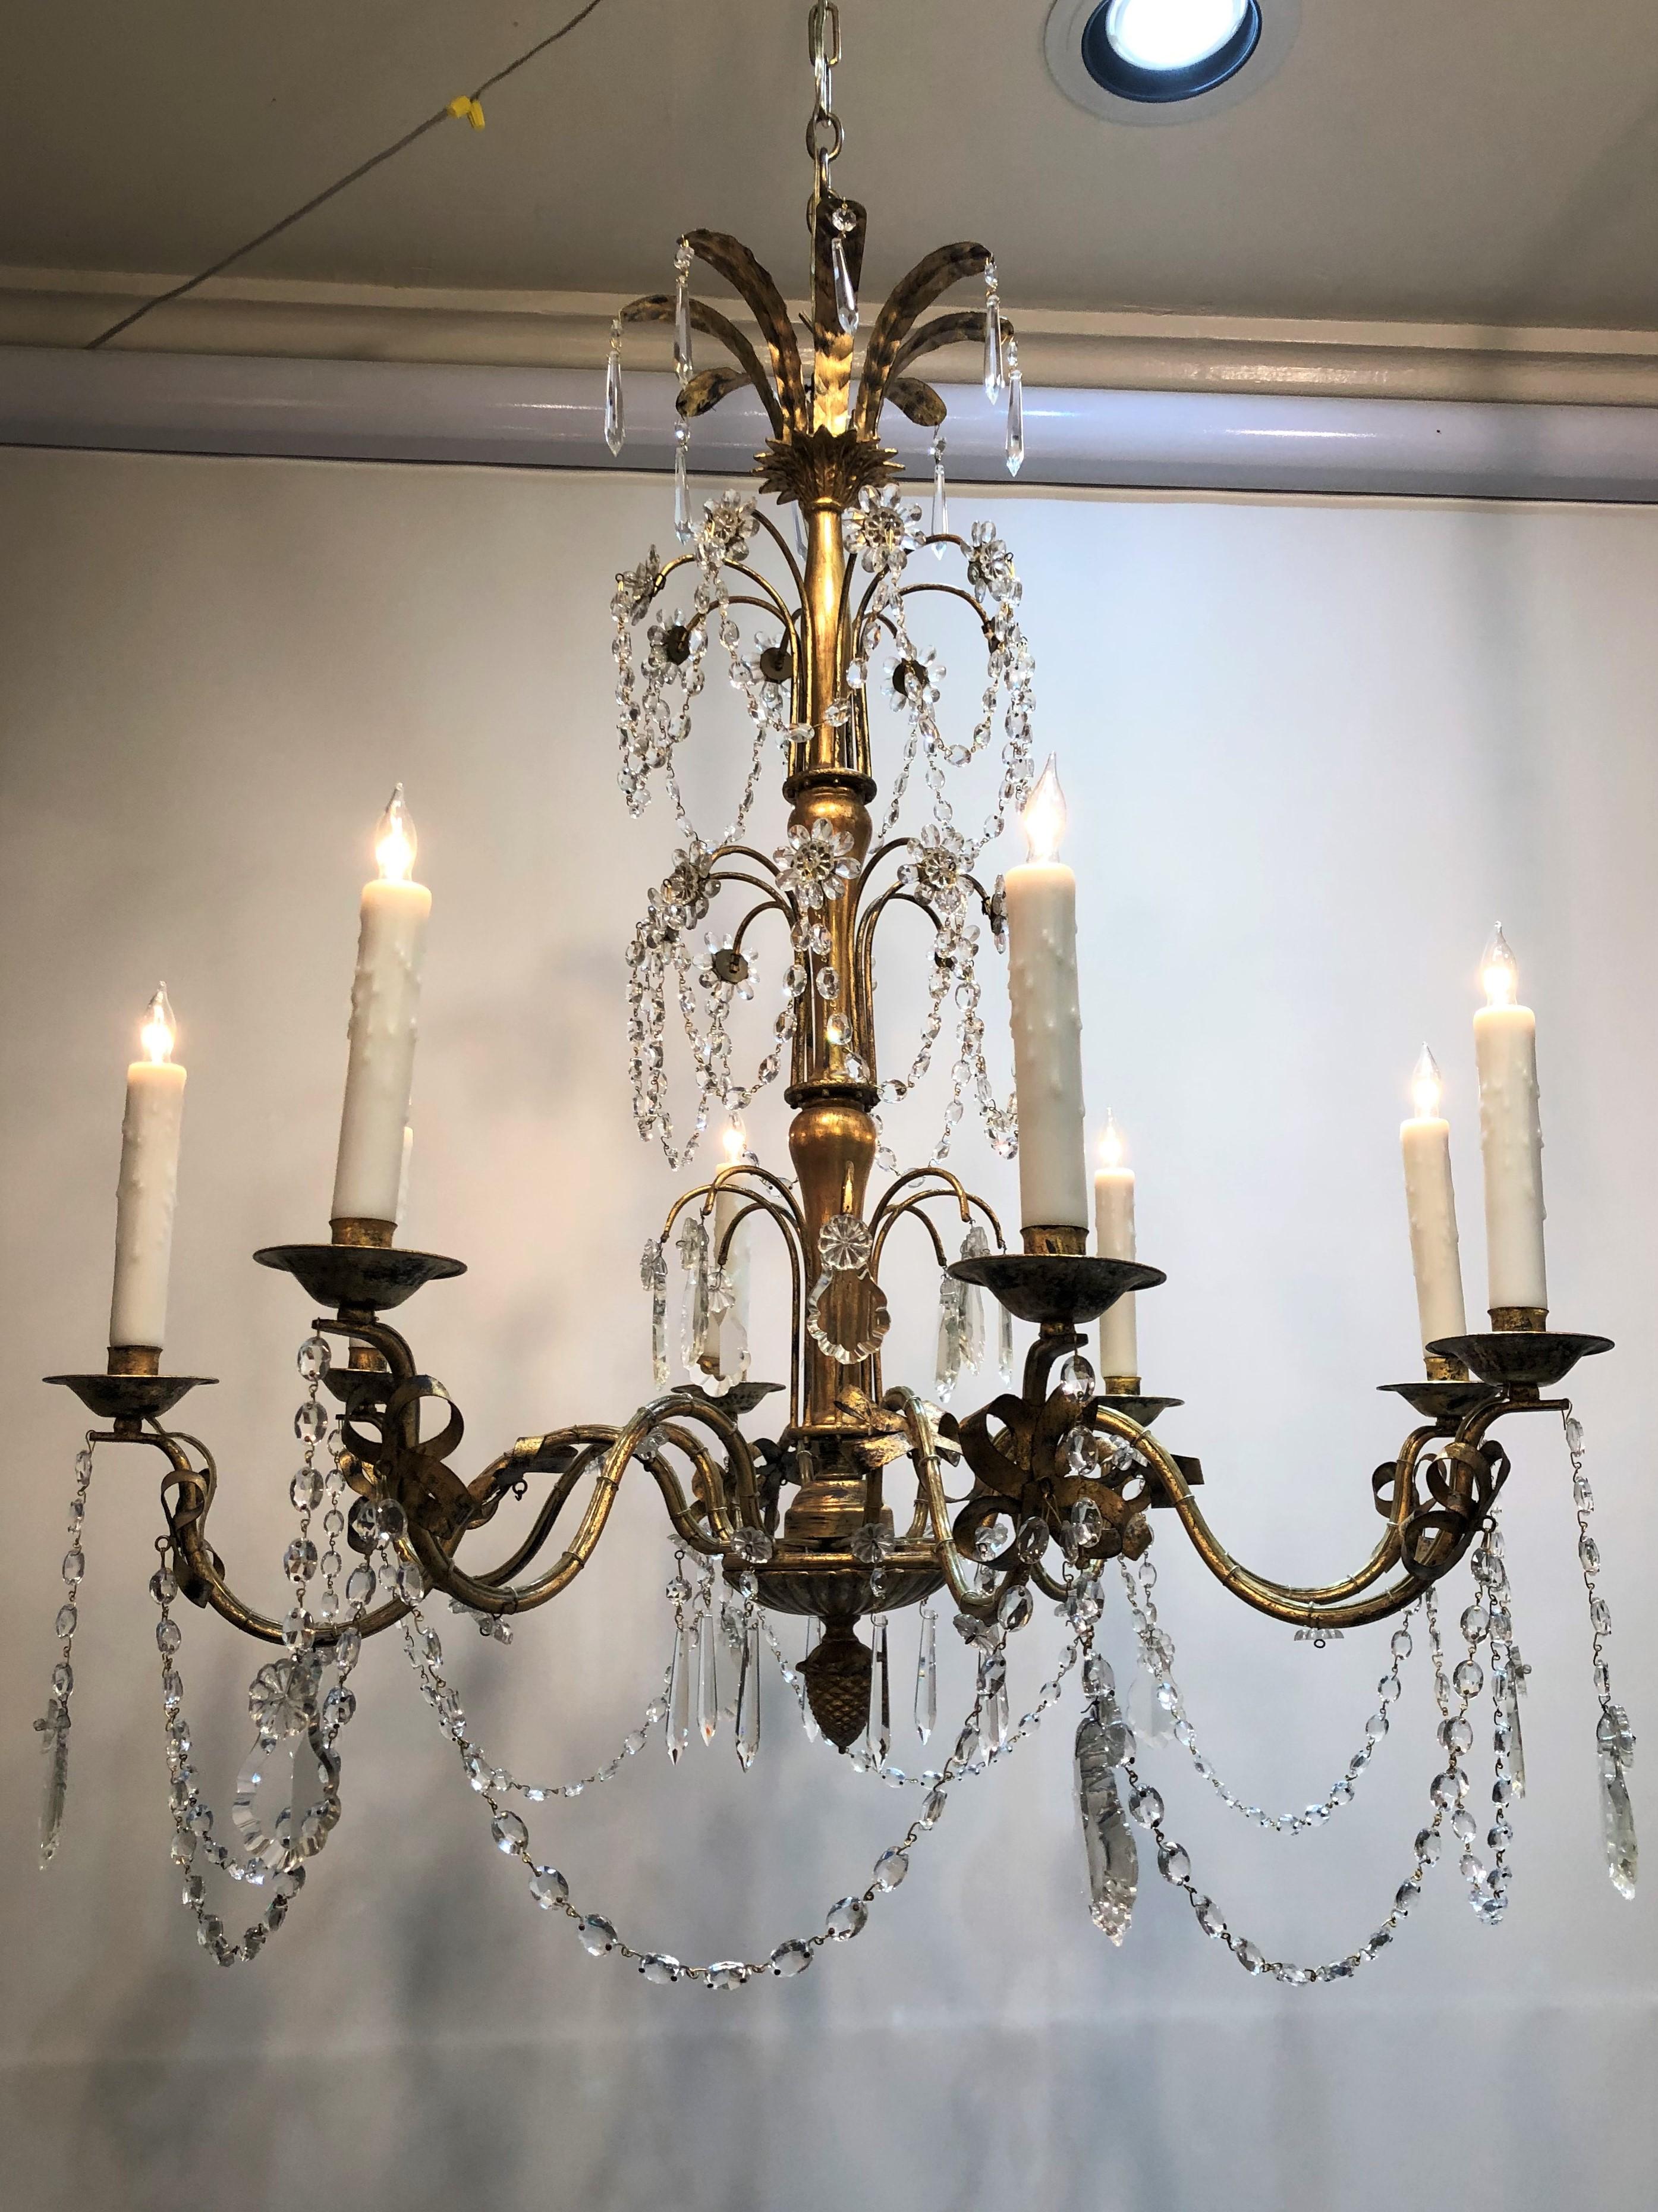 This chandelier was made in France during the mid-20th century. The body is tole with eight candle arms with crystal prisms and swags beneath each bobeche. Featuring a stylized pine cone drop finial. The chandelier has recently been rewired with new